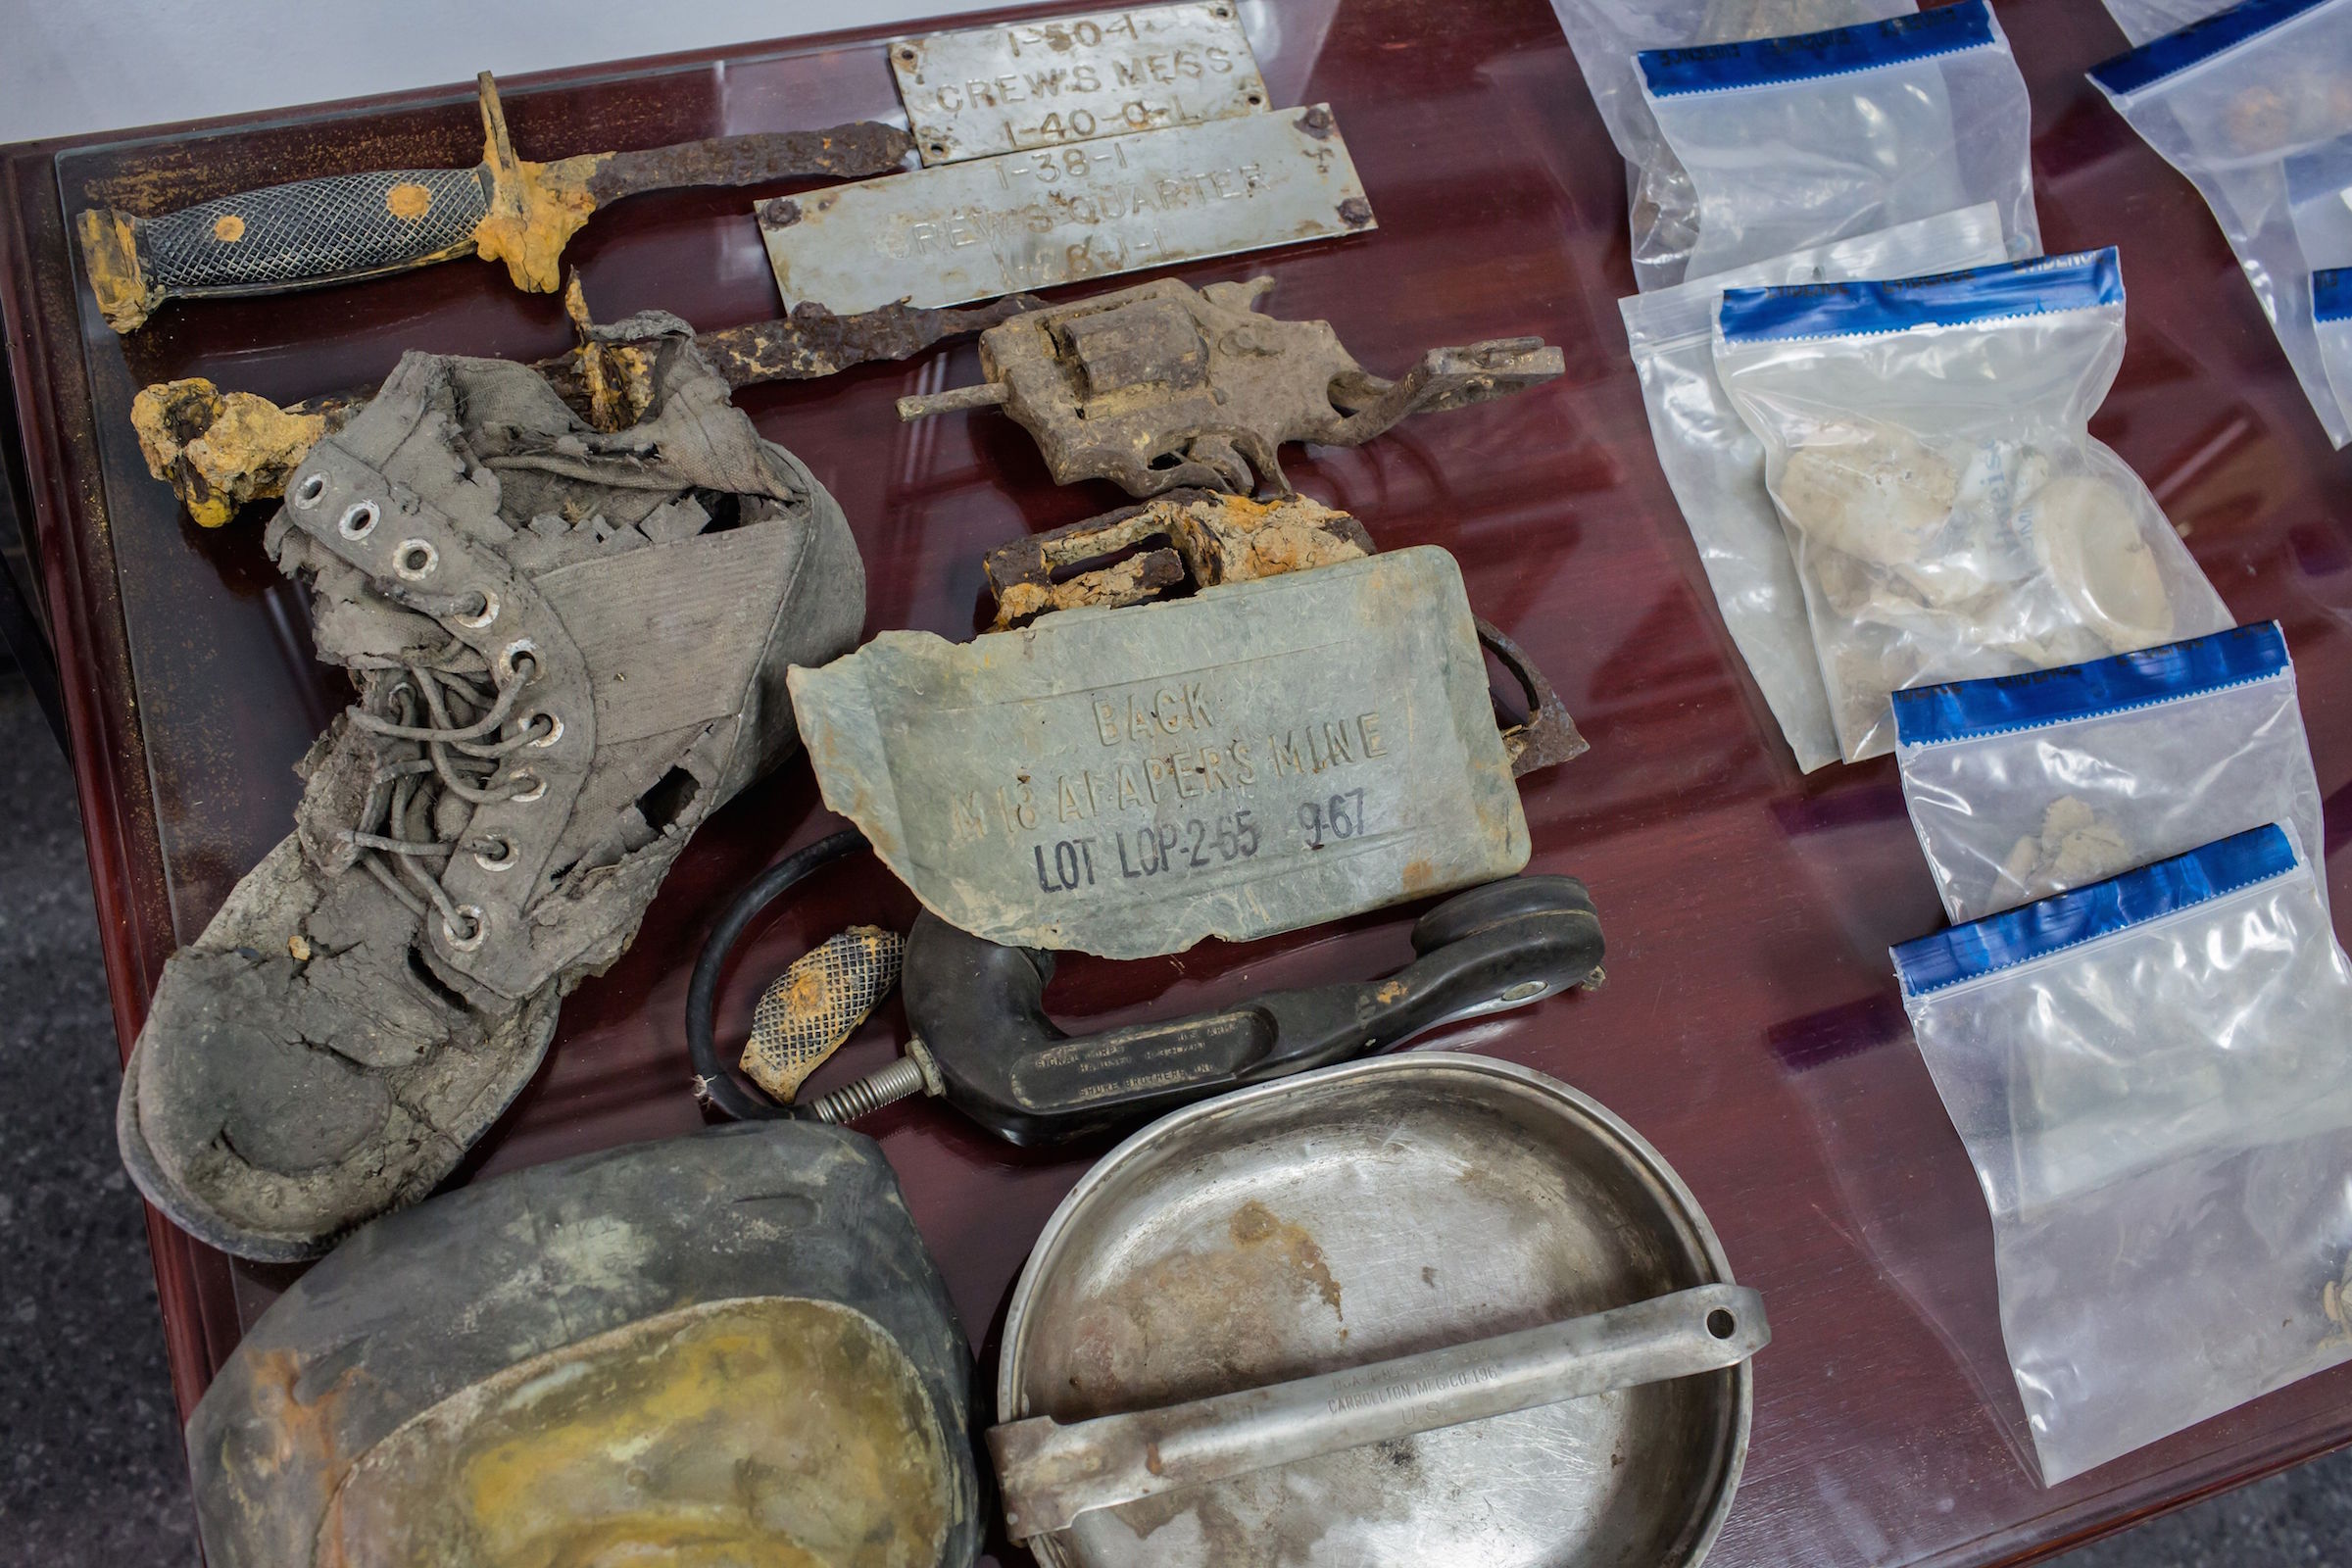 This picture taken on April 8, 2018 shows recovered weapons and personal belongings to missing US soldiers in Vietnam displayed at the Defense POW/MIA Accounting Agency in Hanoi. - The Defense POW/MIA Accounting Agency (DPAA) has been working in Vietnam for more than 30 years, before the former war foes established diplomatic ties in 1995. The agency was born out of a war-era effort by the wives of US POWs in Vietnam who demanded US leaders do more to get their imprisoned husbands home. (Photo by Thanh NGUYEN / AFP) / TO GO WITH Vietnam-war-history-remains,FEATURE by Jenny Vaughan and Quy Le Bui        (Photo credit should read THANH NGUYEN/AFP/Getty Images)